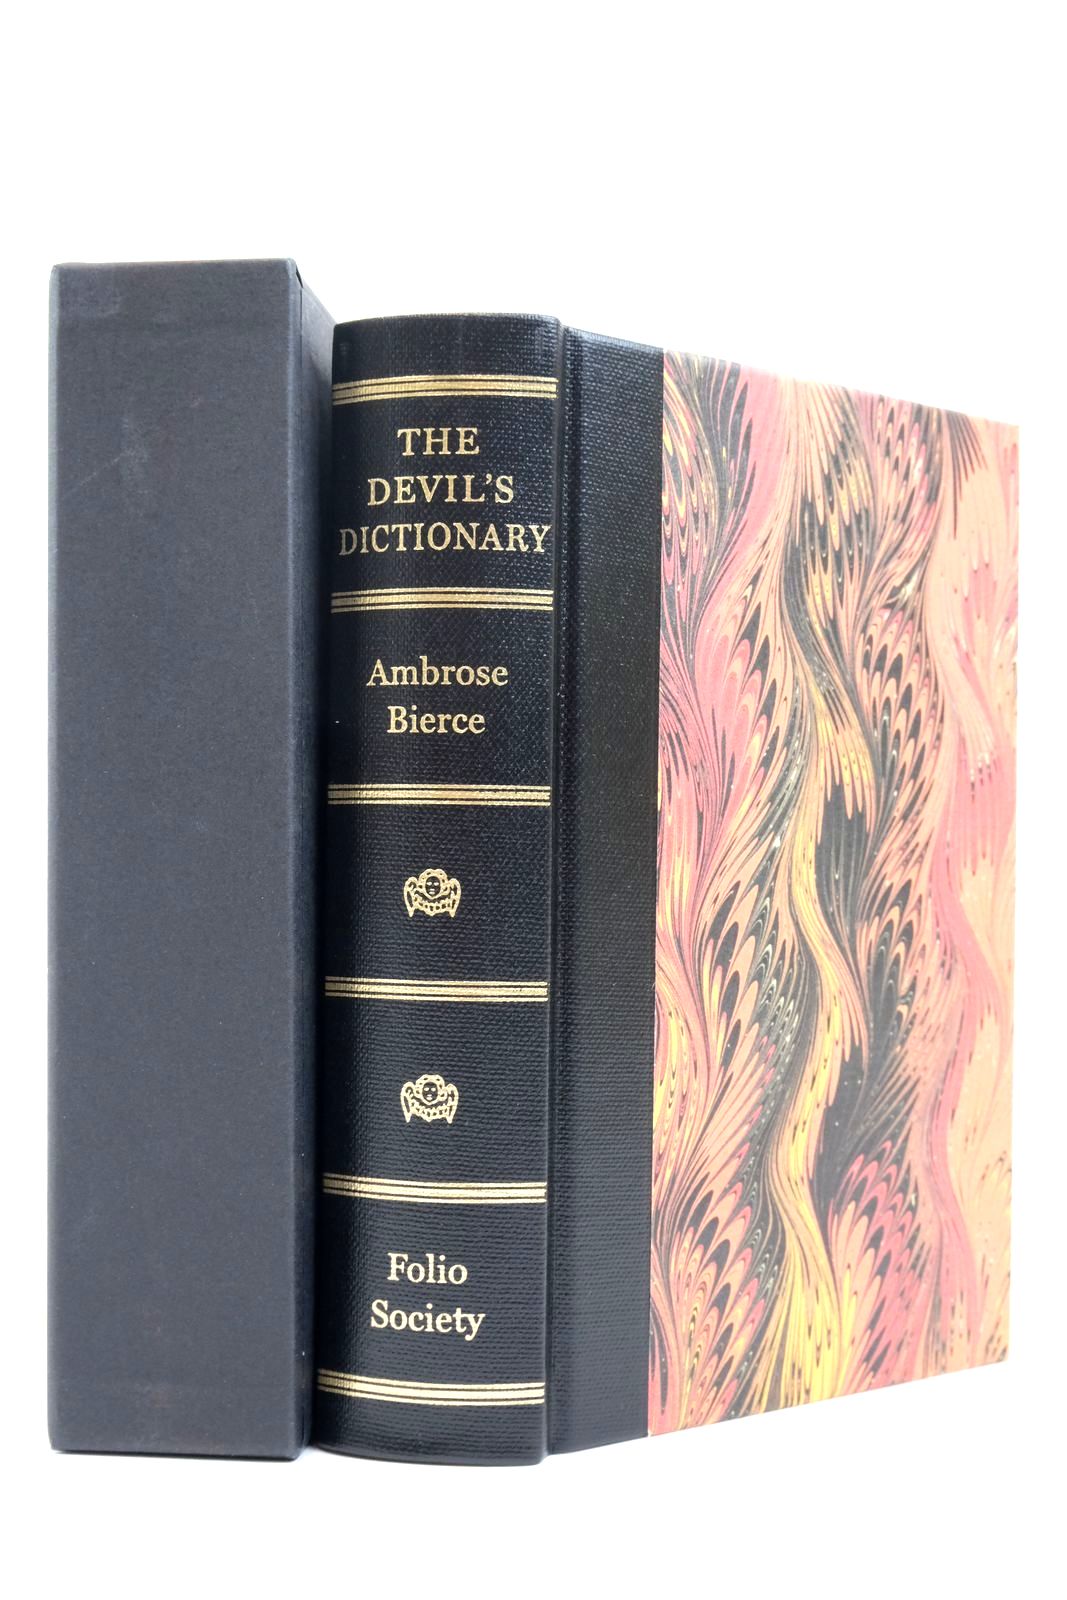 Photo of THE DEVIL'S DICTIONARY written by Bierce, Ambrose Kington, Miles illustrated by Forster, Peter published by Folio Society (STOCK CODE: 2138418)  for sale by Stella & Rose's Books